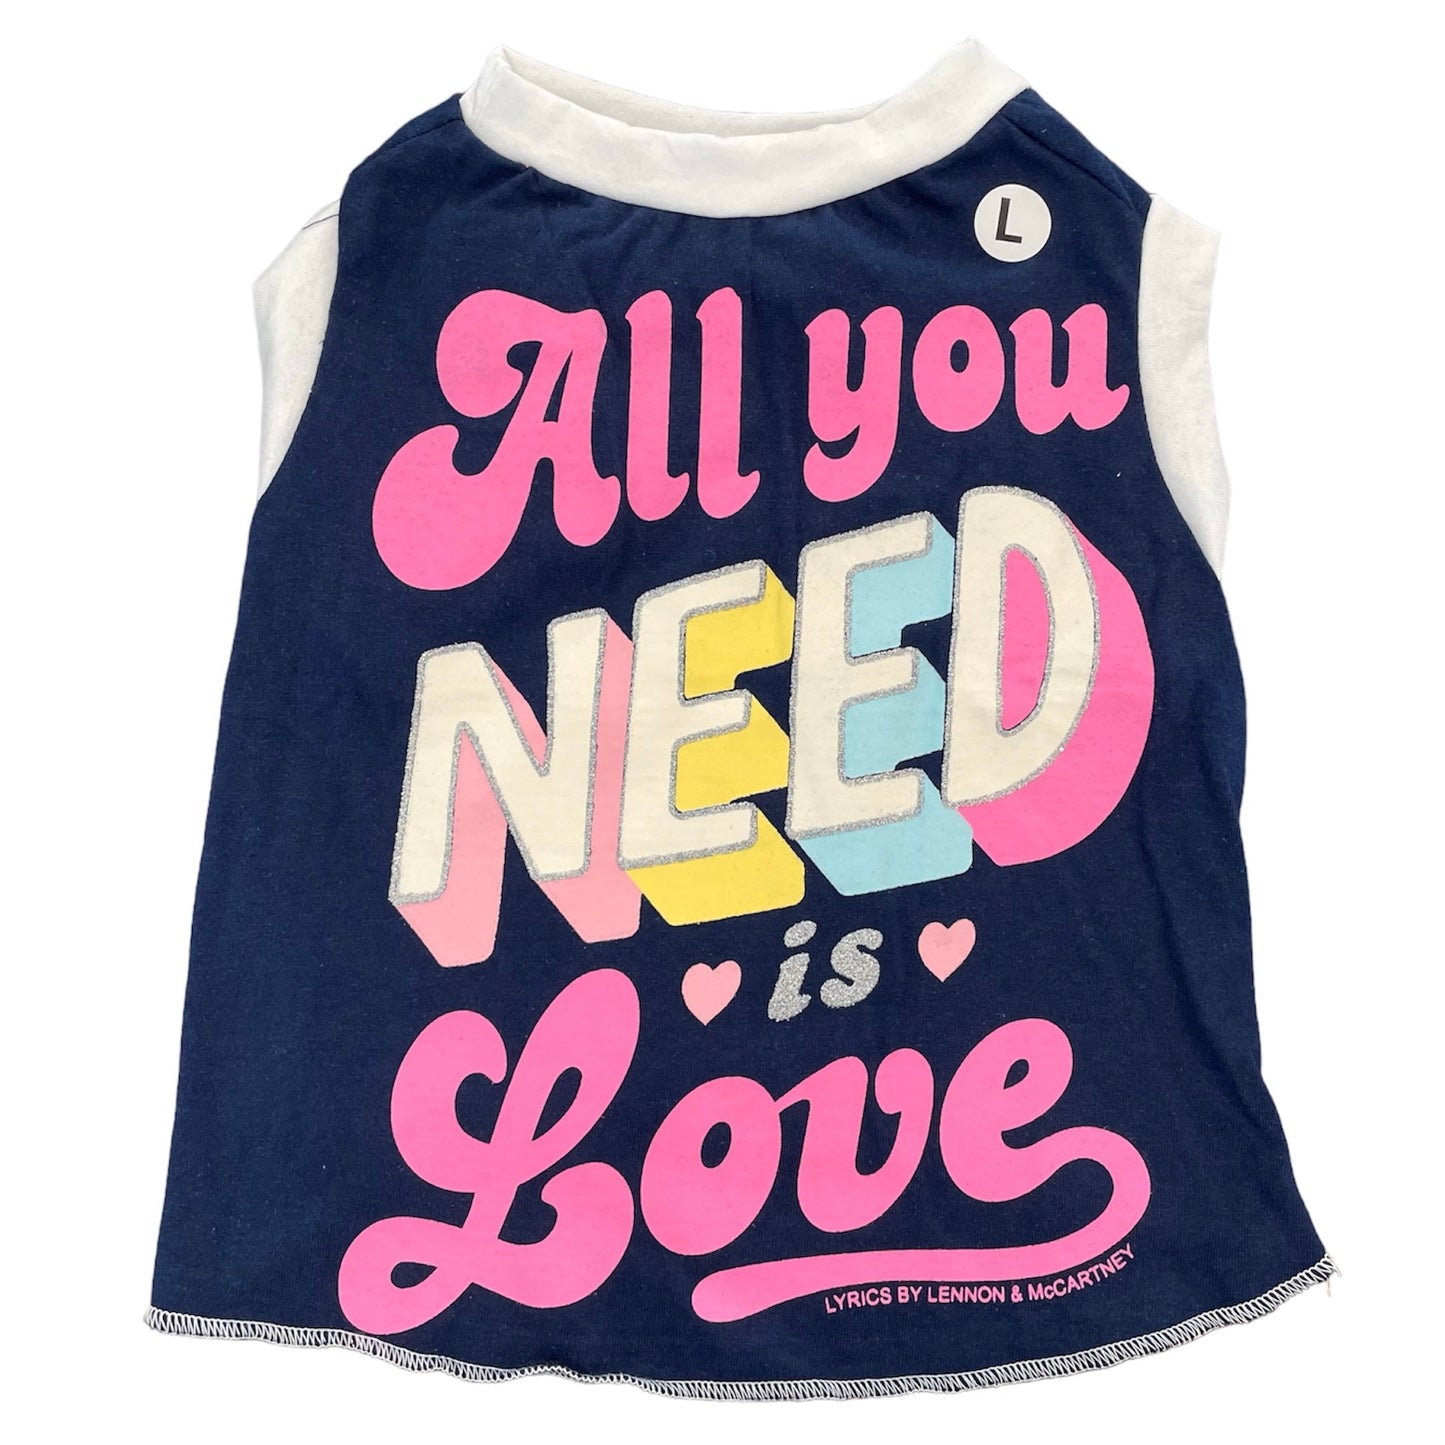 Upcycled Dog Tank - L "ALL YOU NEED"